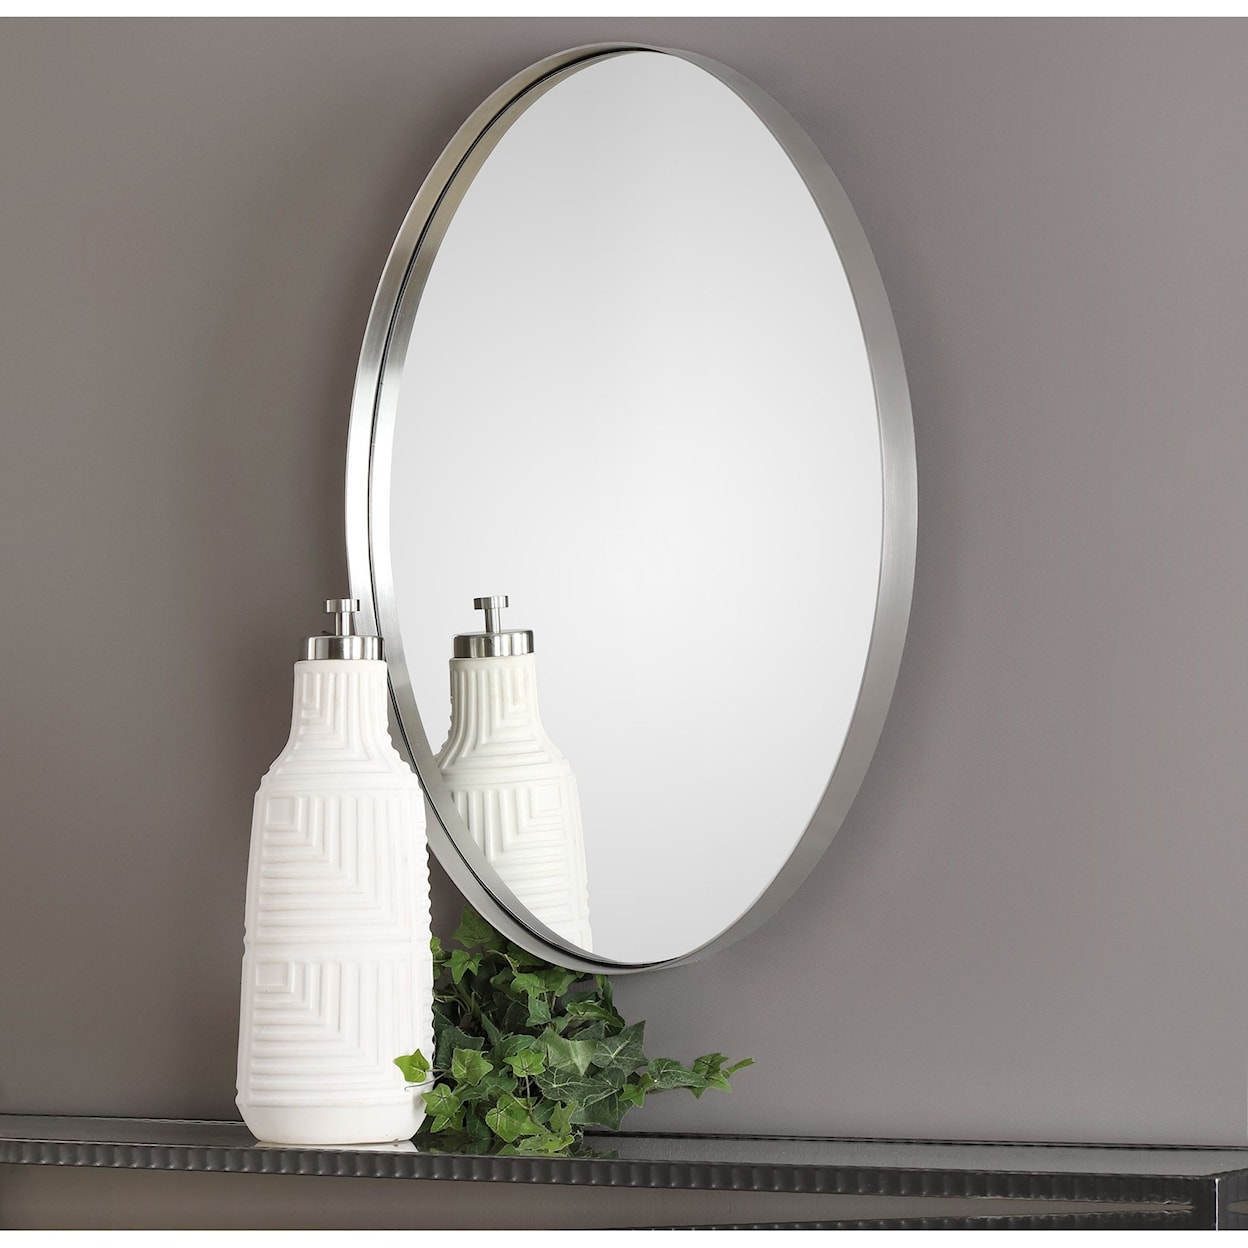 Uttermost Mirrors - Oval Pursley Brushed Nickel Oval Mirror